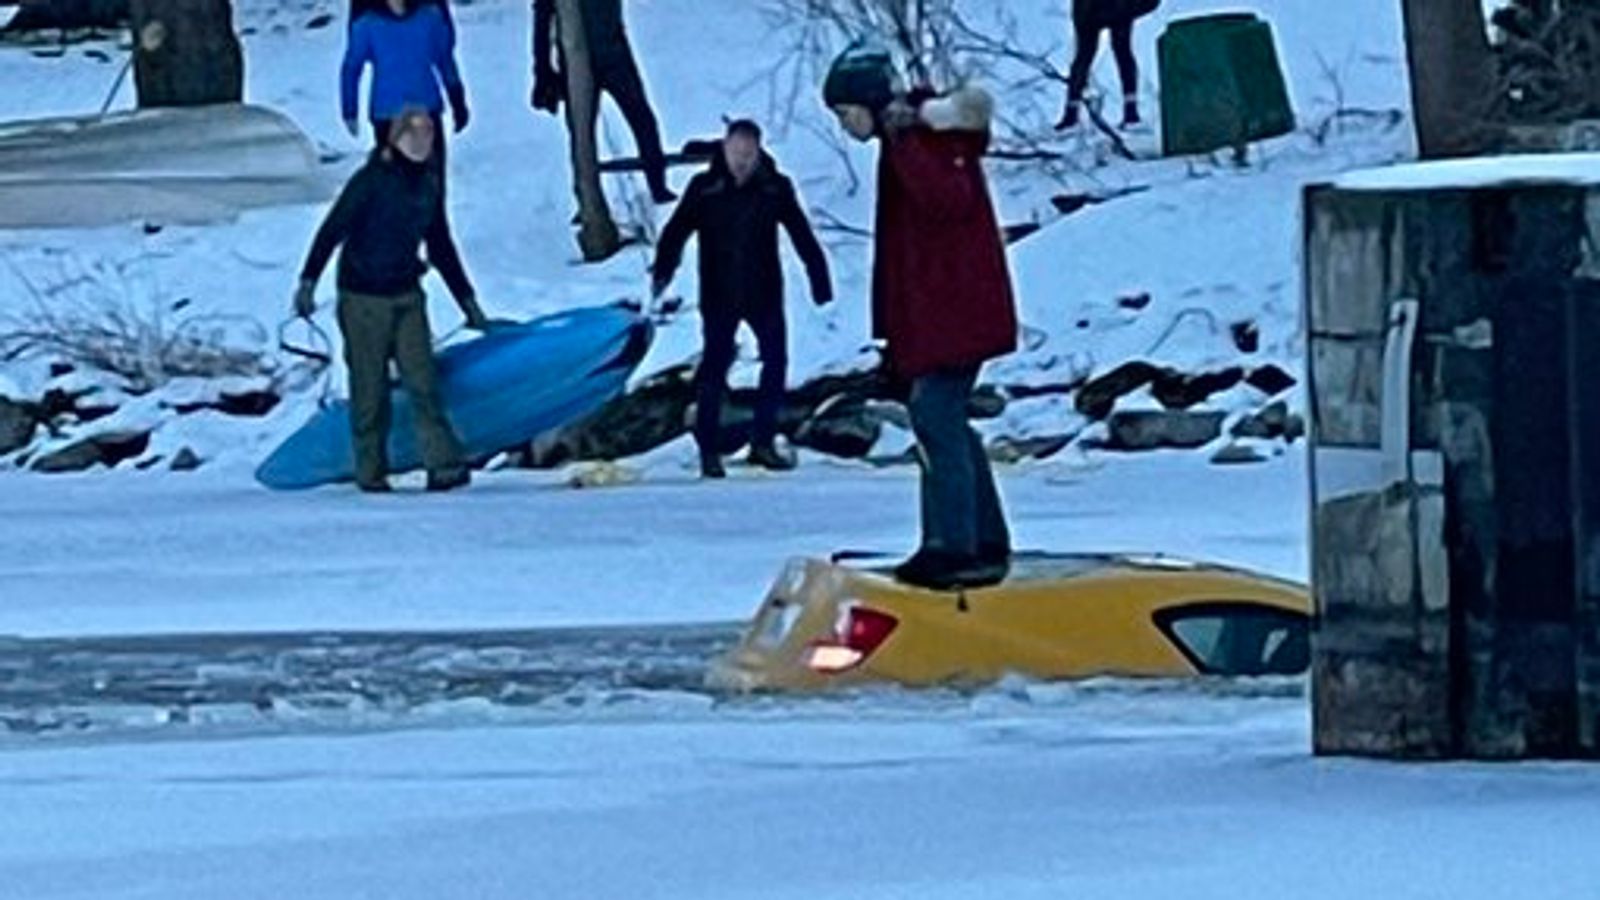 Canada: Woman rescued using kayaks after car crashes through ice on frozen river